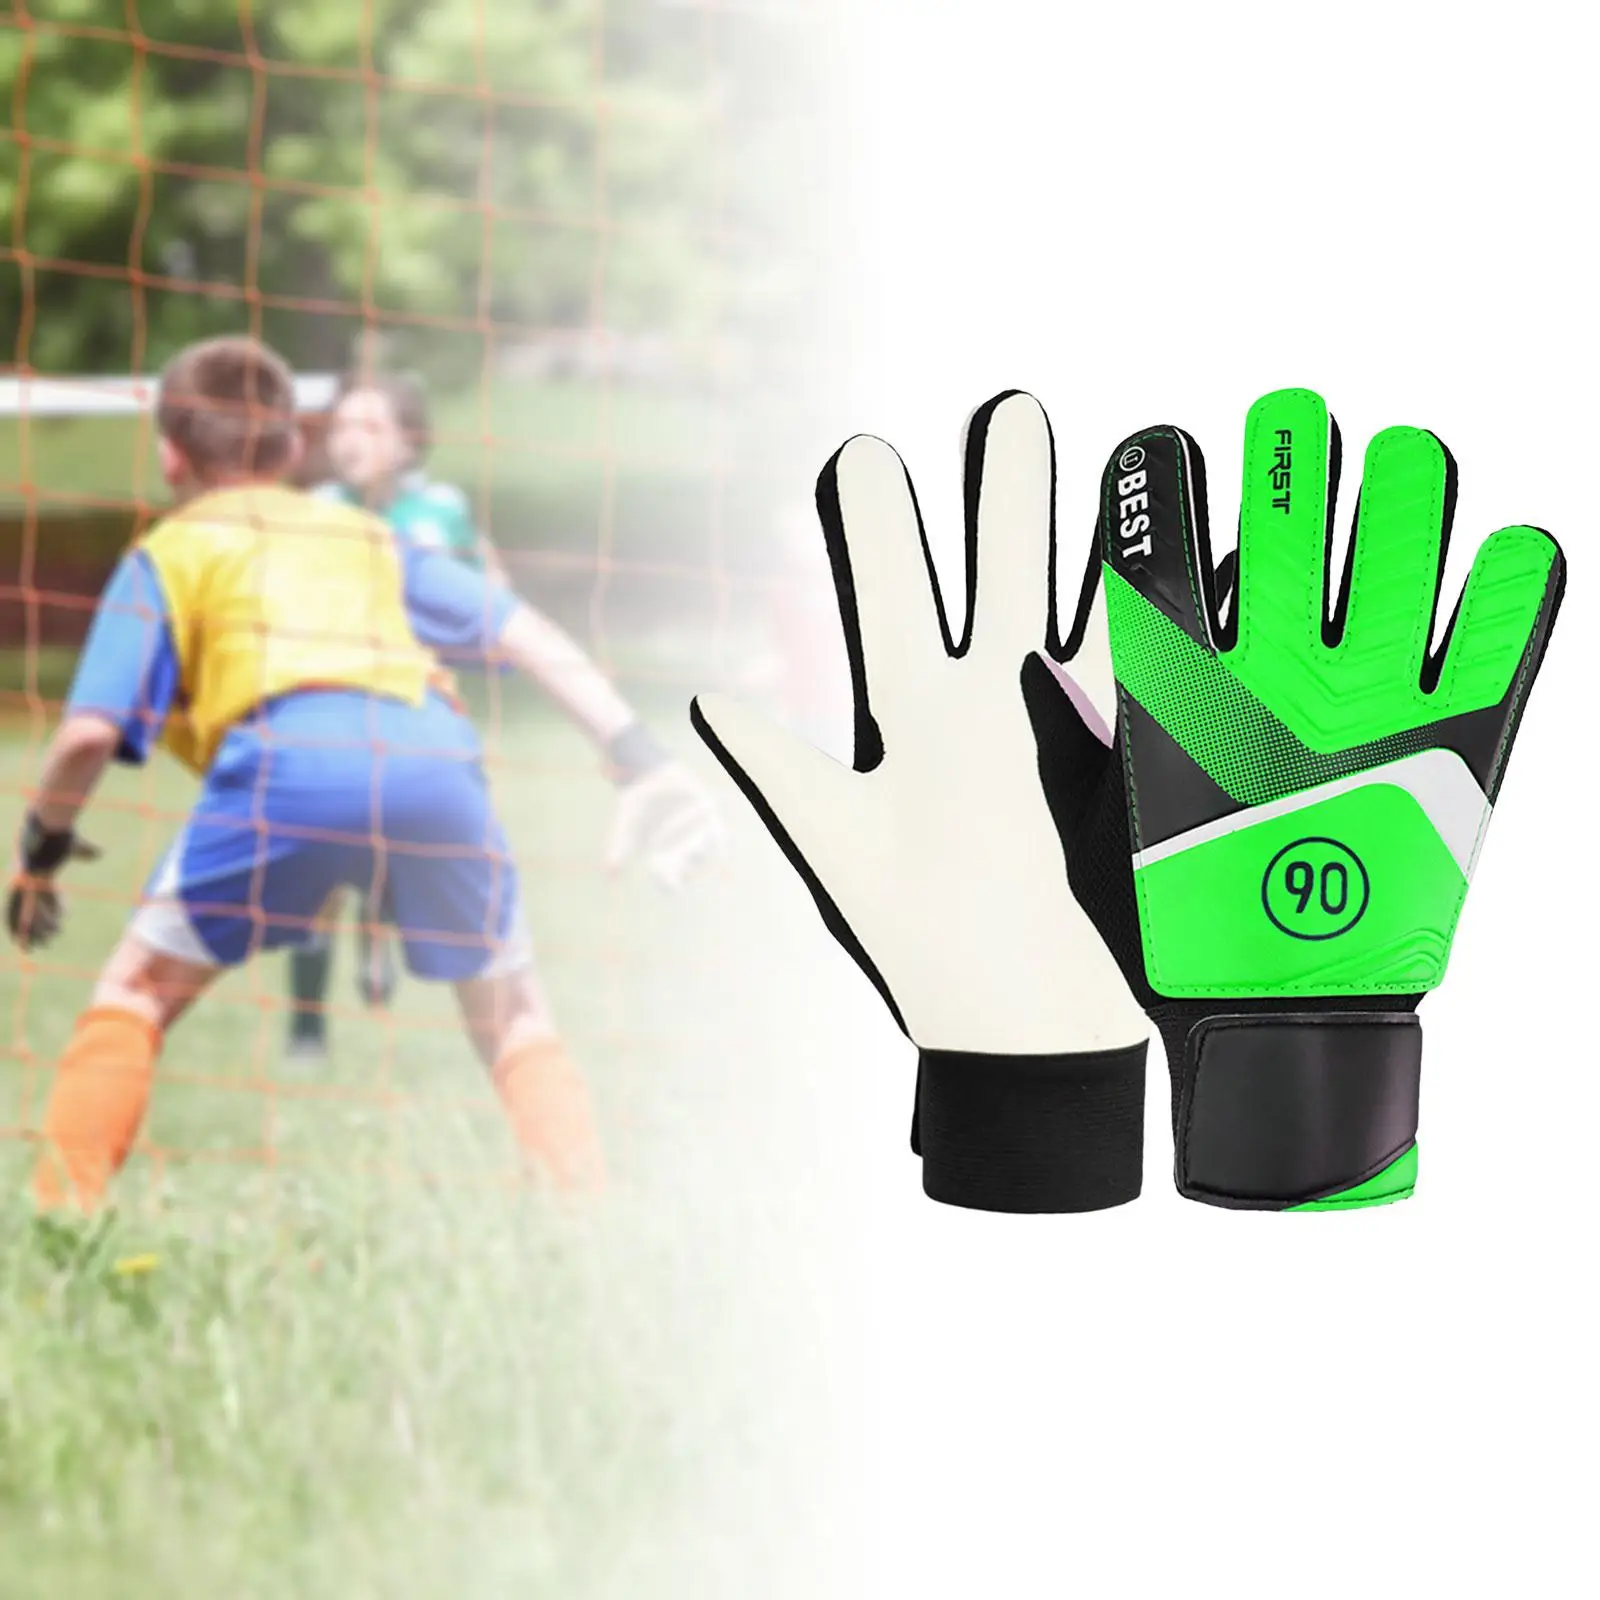 Football Goalkeeper Gloves Anticollision Finger Protection Comfortable Strong Grip Breathable Goalie Gloves Latex Palm for Kids